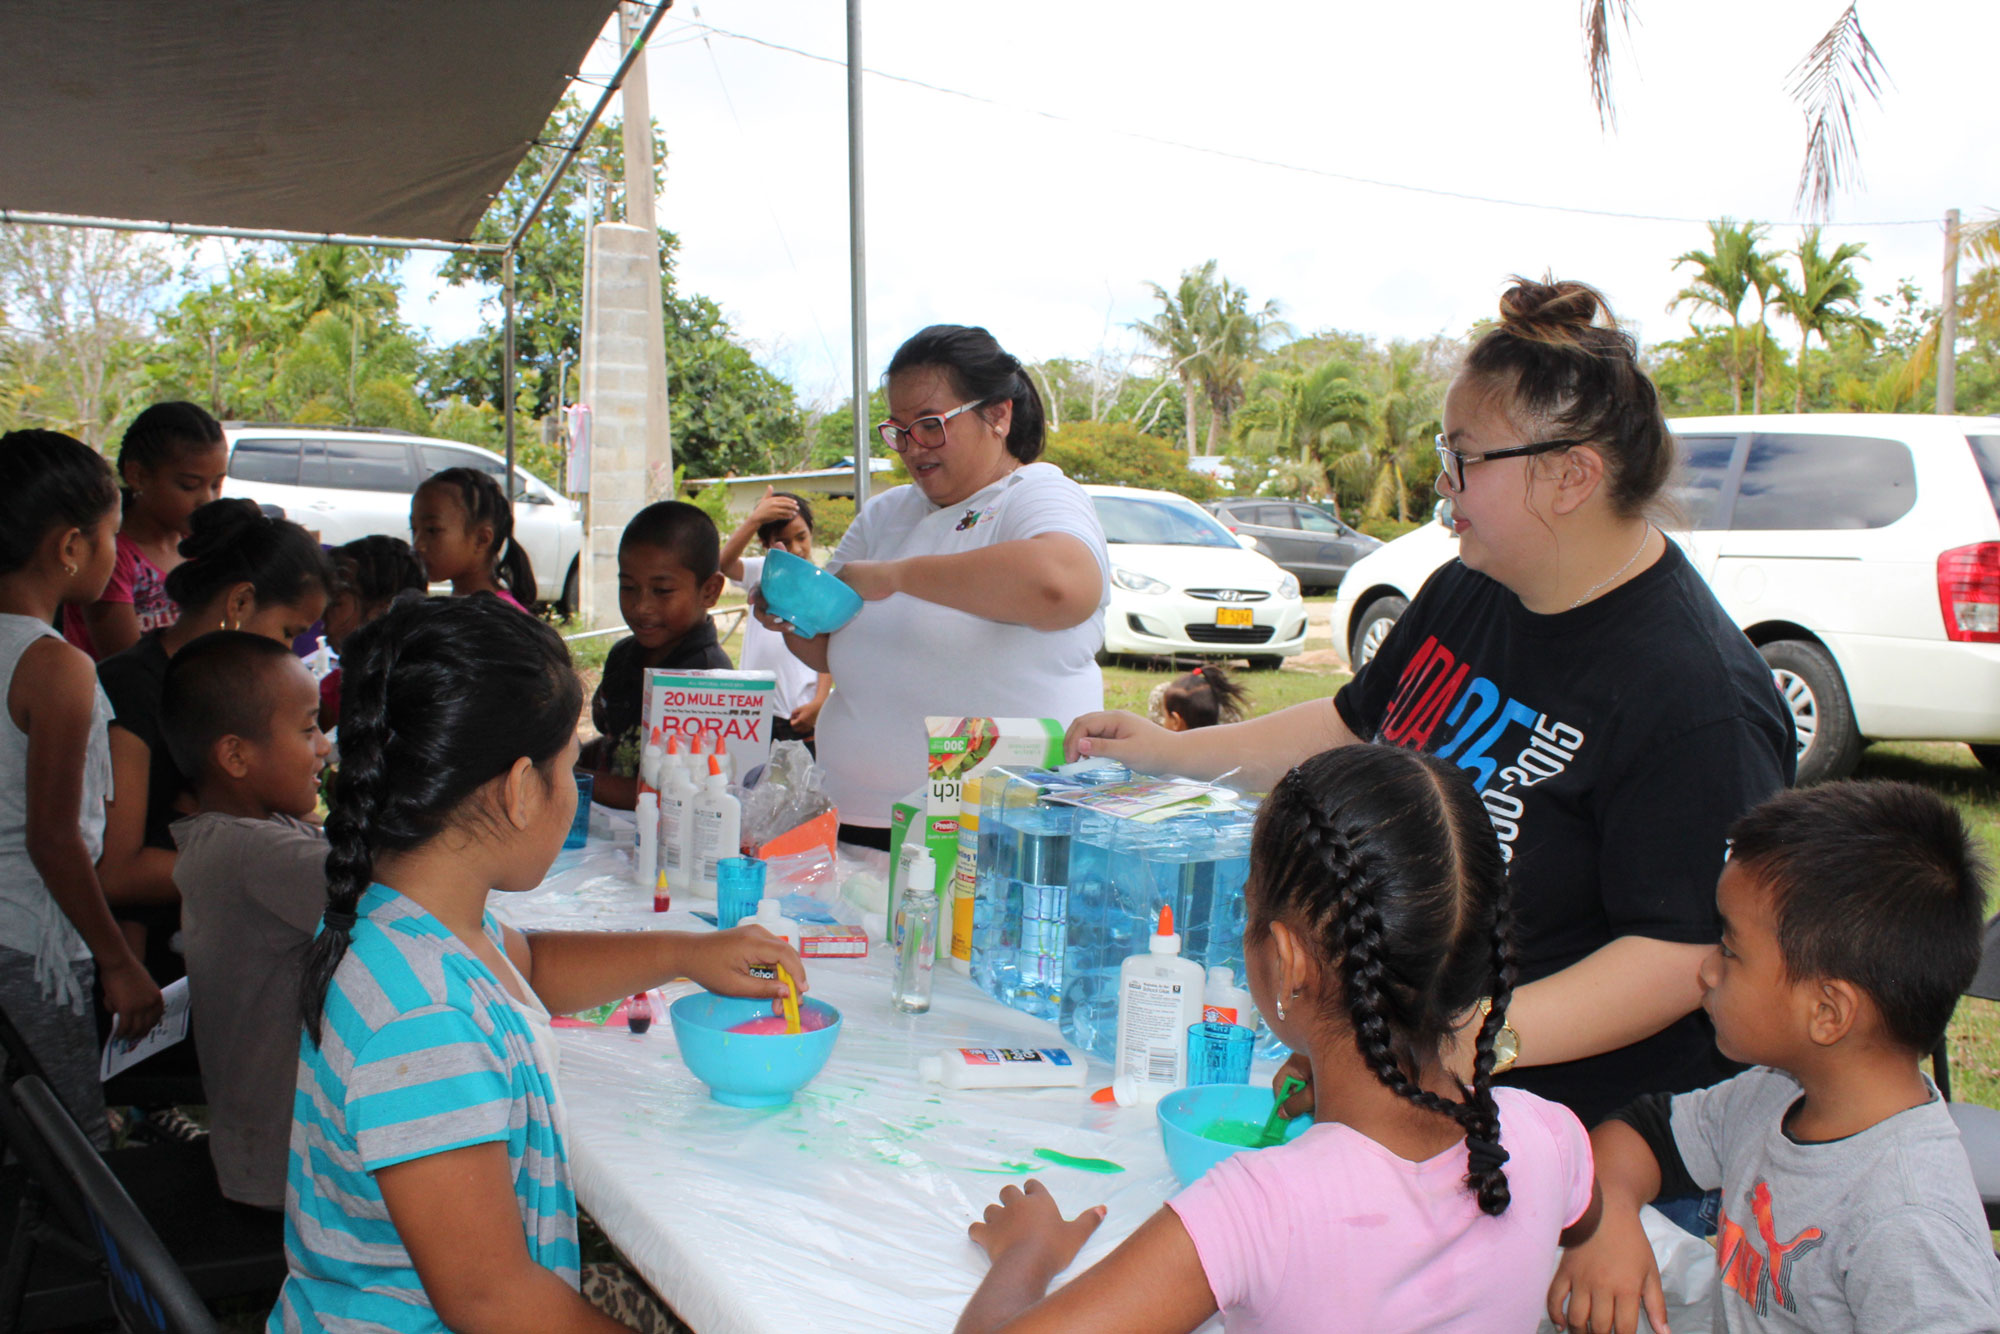 Terry Naputi, Guam CEDDERS Research Associate (back, left), and Jenika Ballesta, Research Associate (standing, right), assist children in making GAK out of simple household products at Gill Baza, Yigo on June 16.